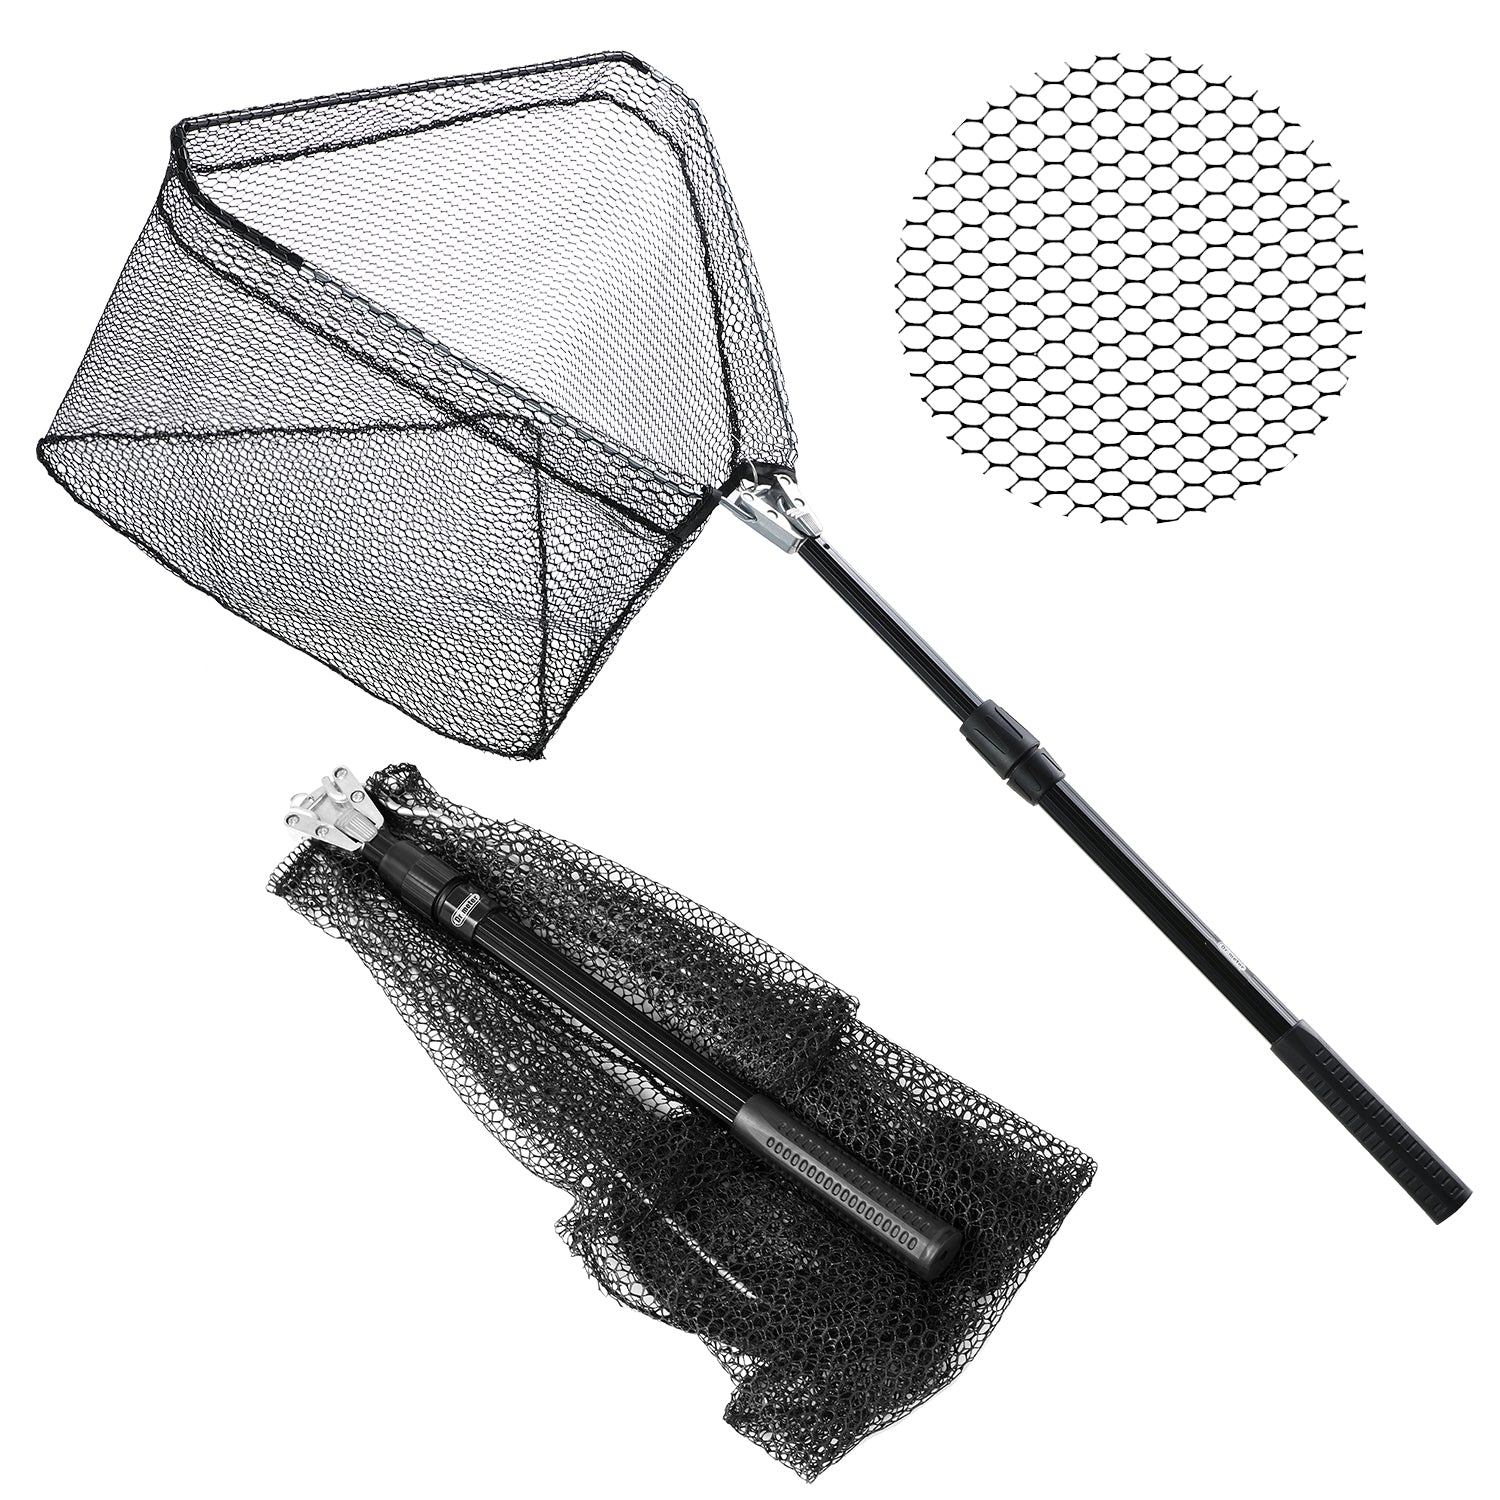 Fishing Net with Long Robust Telescopic Handle for Freshwater and